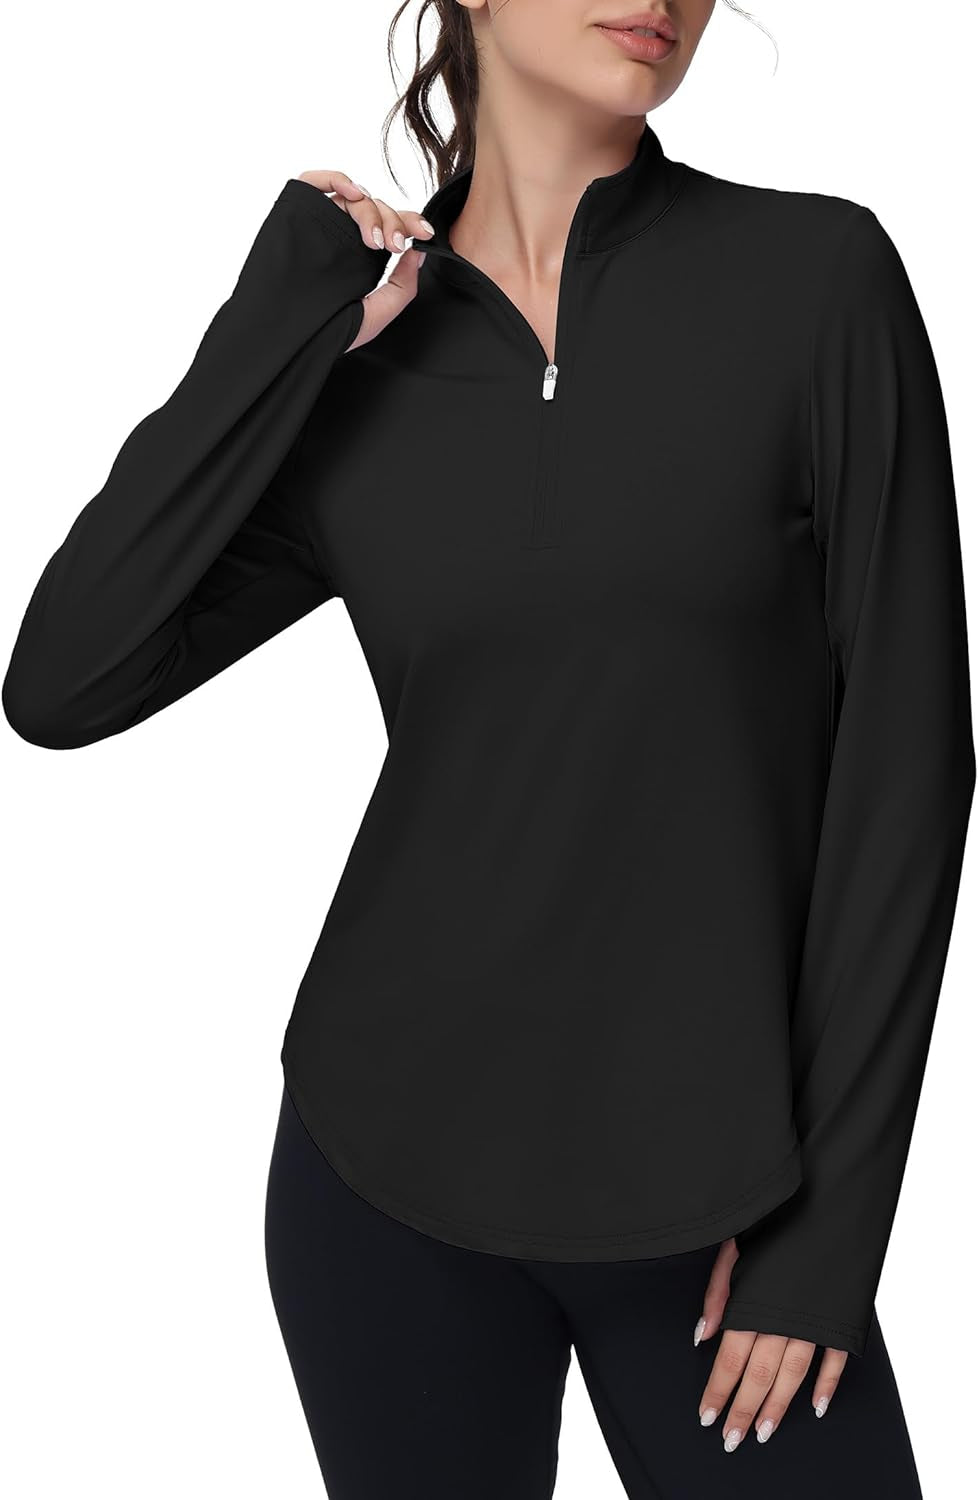 Women'S Golf Polo Long Sleeve Workout Tops V Neck UPF 50+ Sun Protection Quick Dry Lightweight Active Tennis Shirts